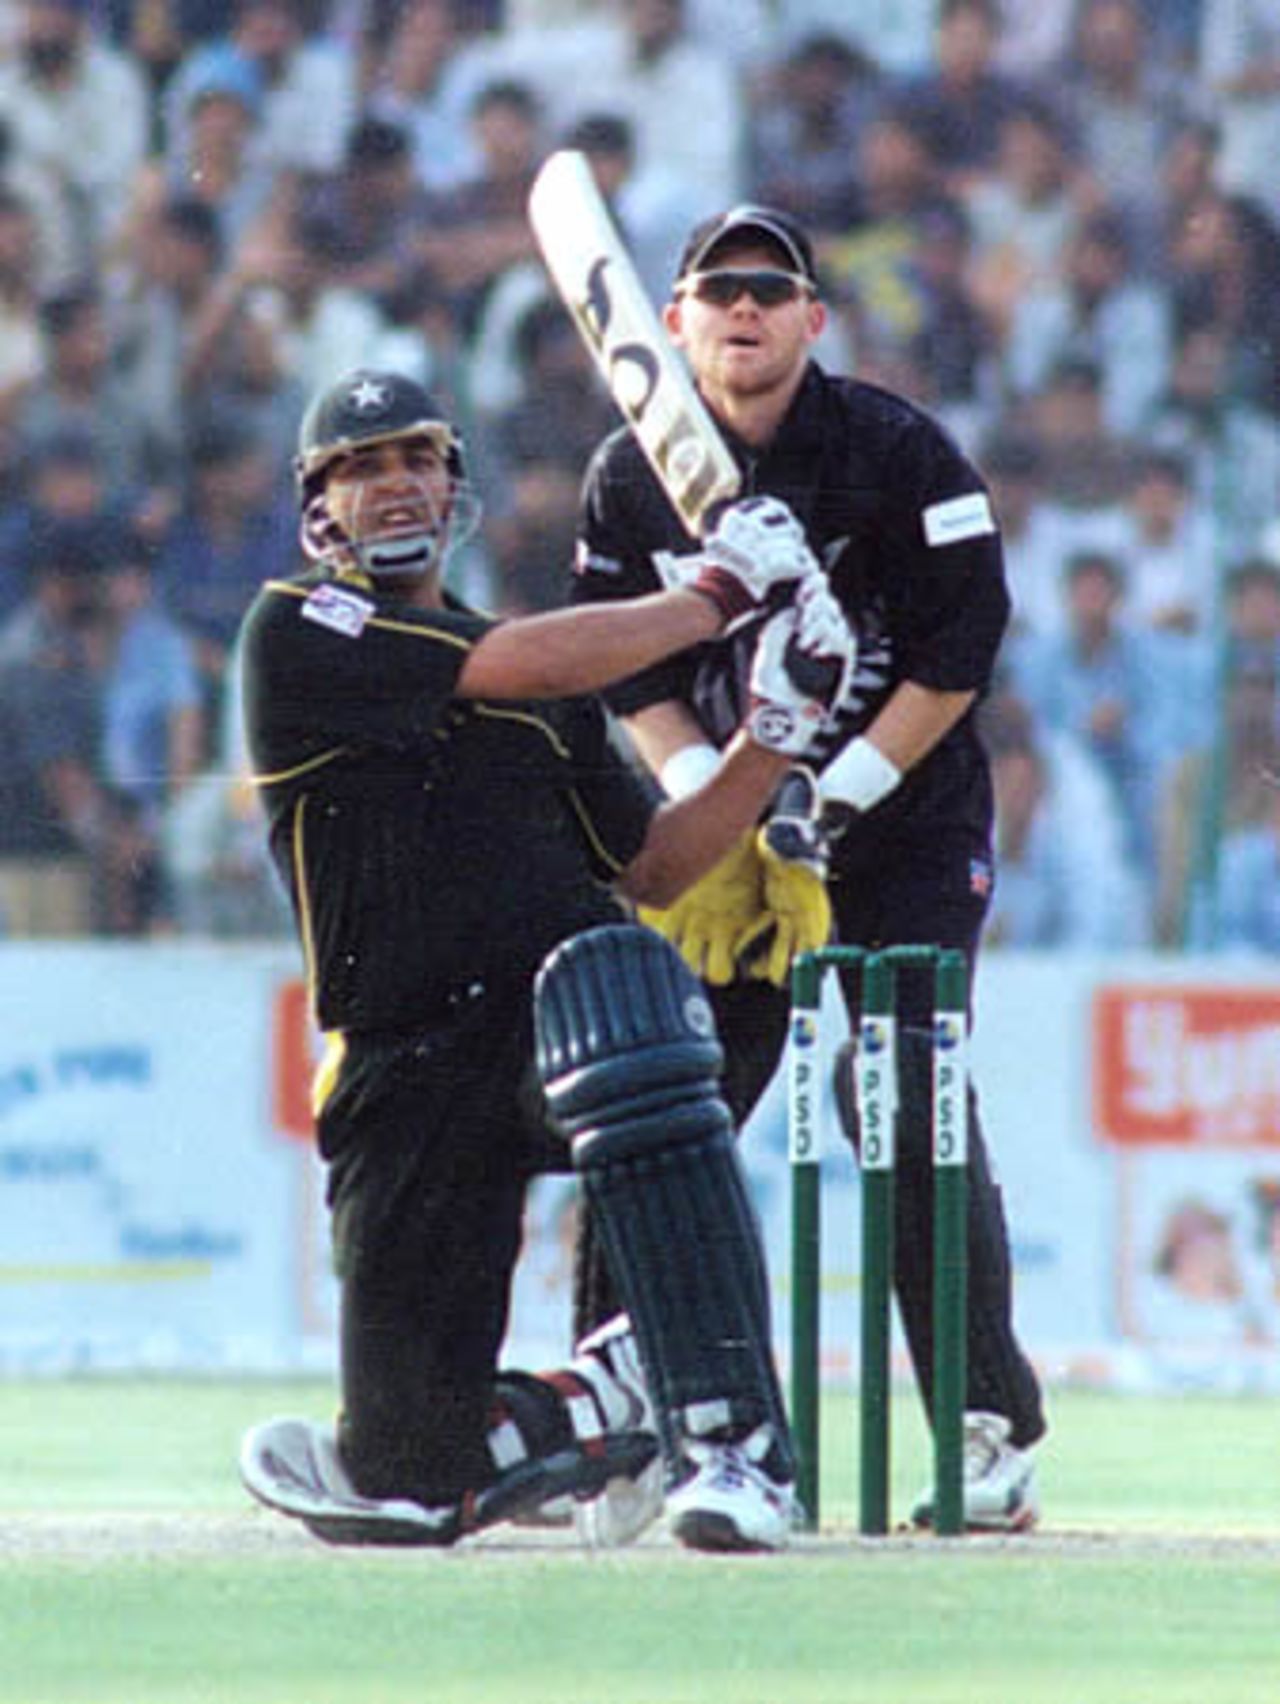 Inzamam tries a big one but was caught - 3rd ODI at Lahore, New Zealand v Pakistan, 27 Apr 2002